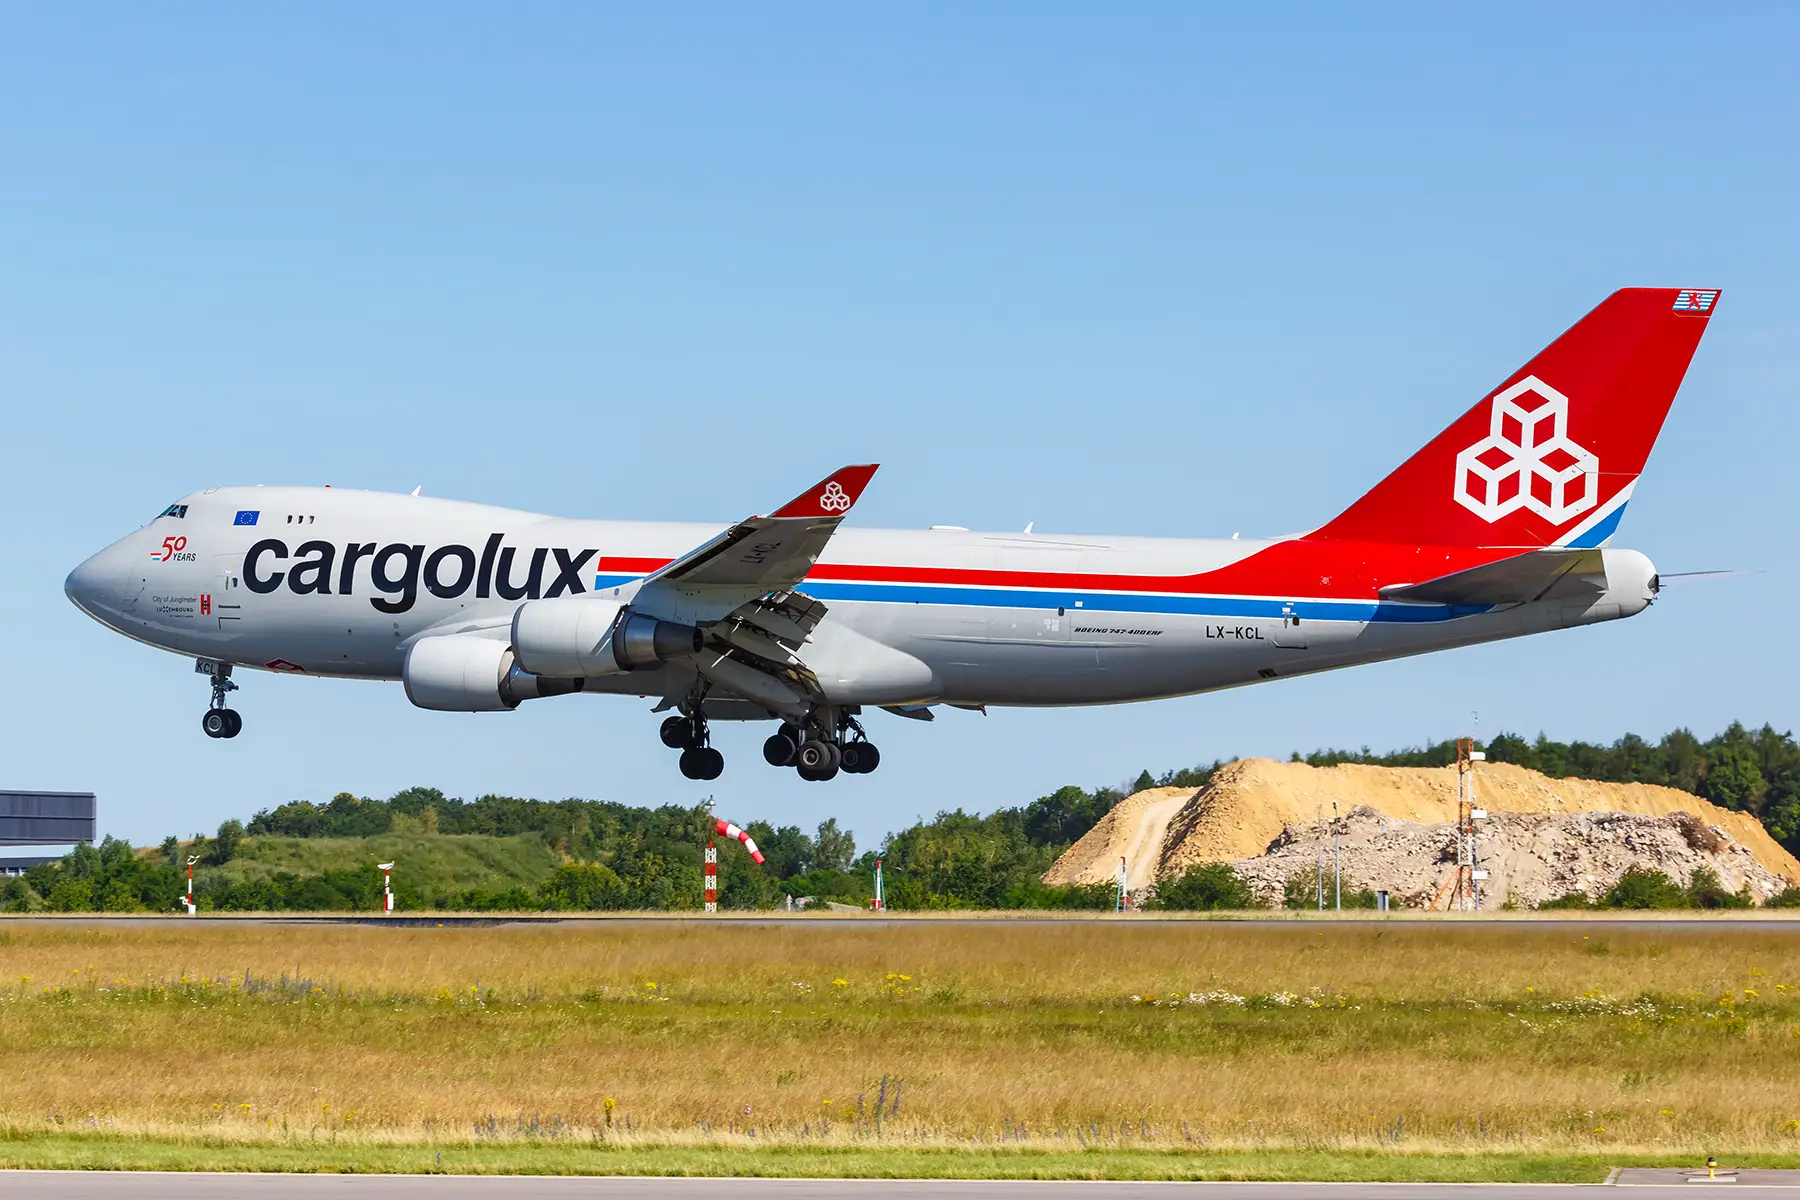 Cargolux aircraft landing at an airport in Luxembourg